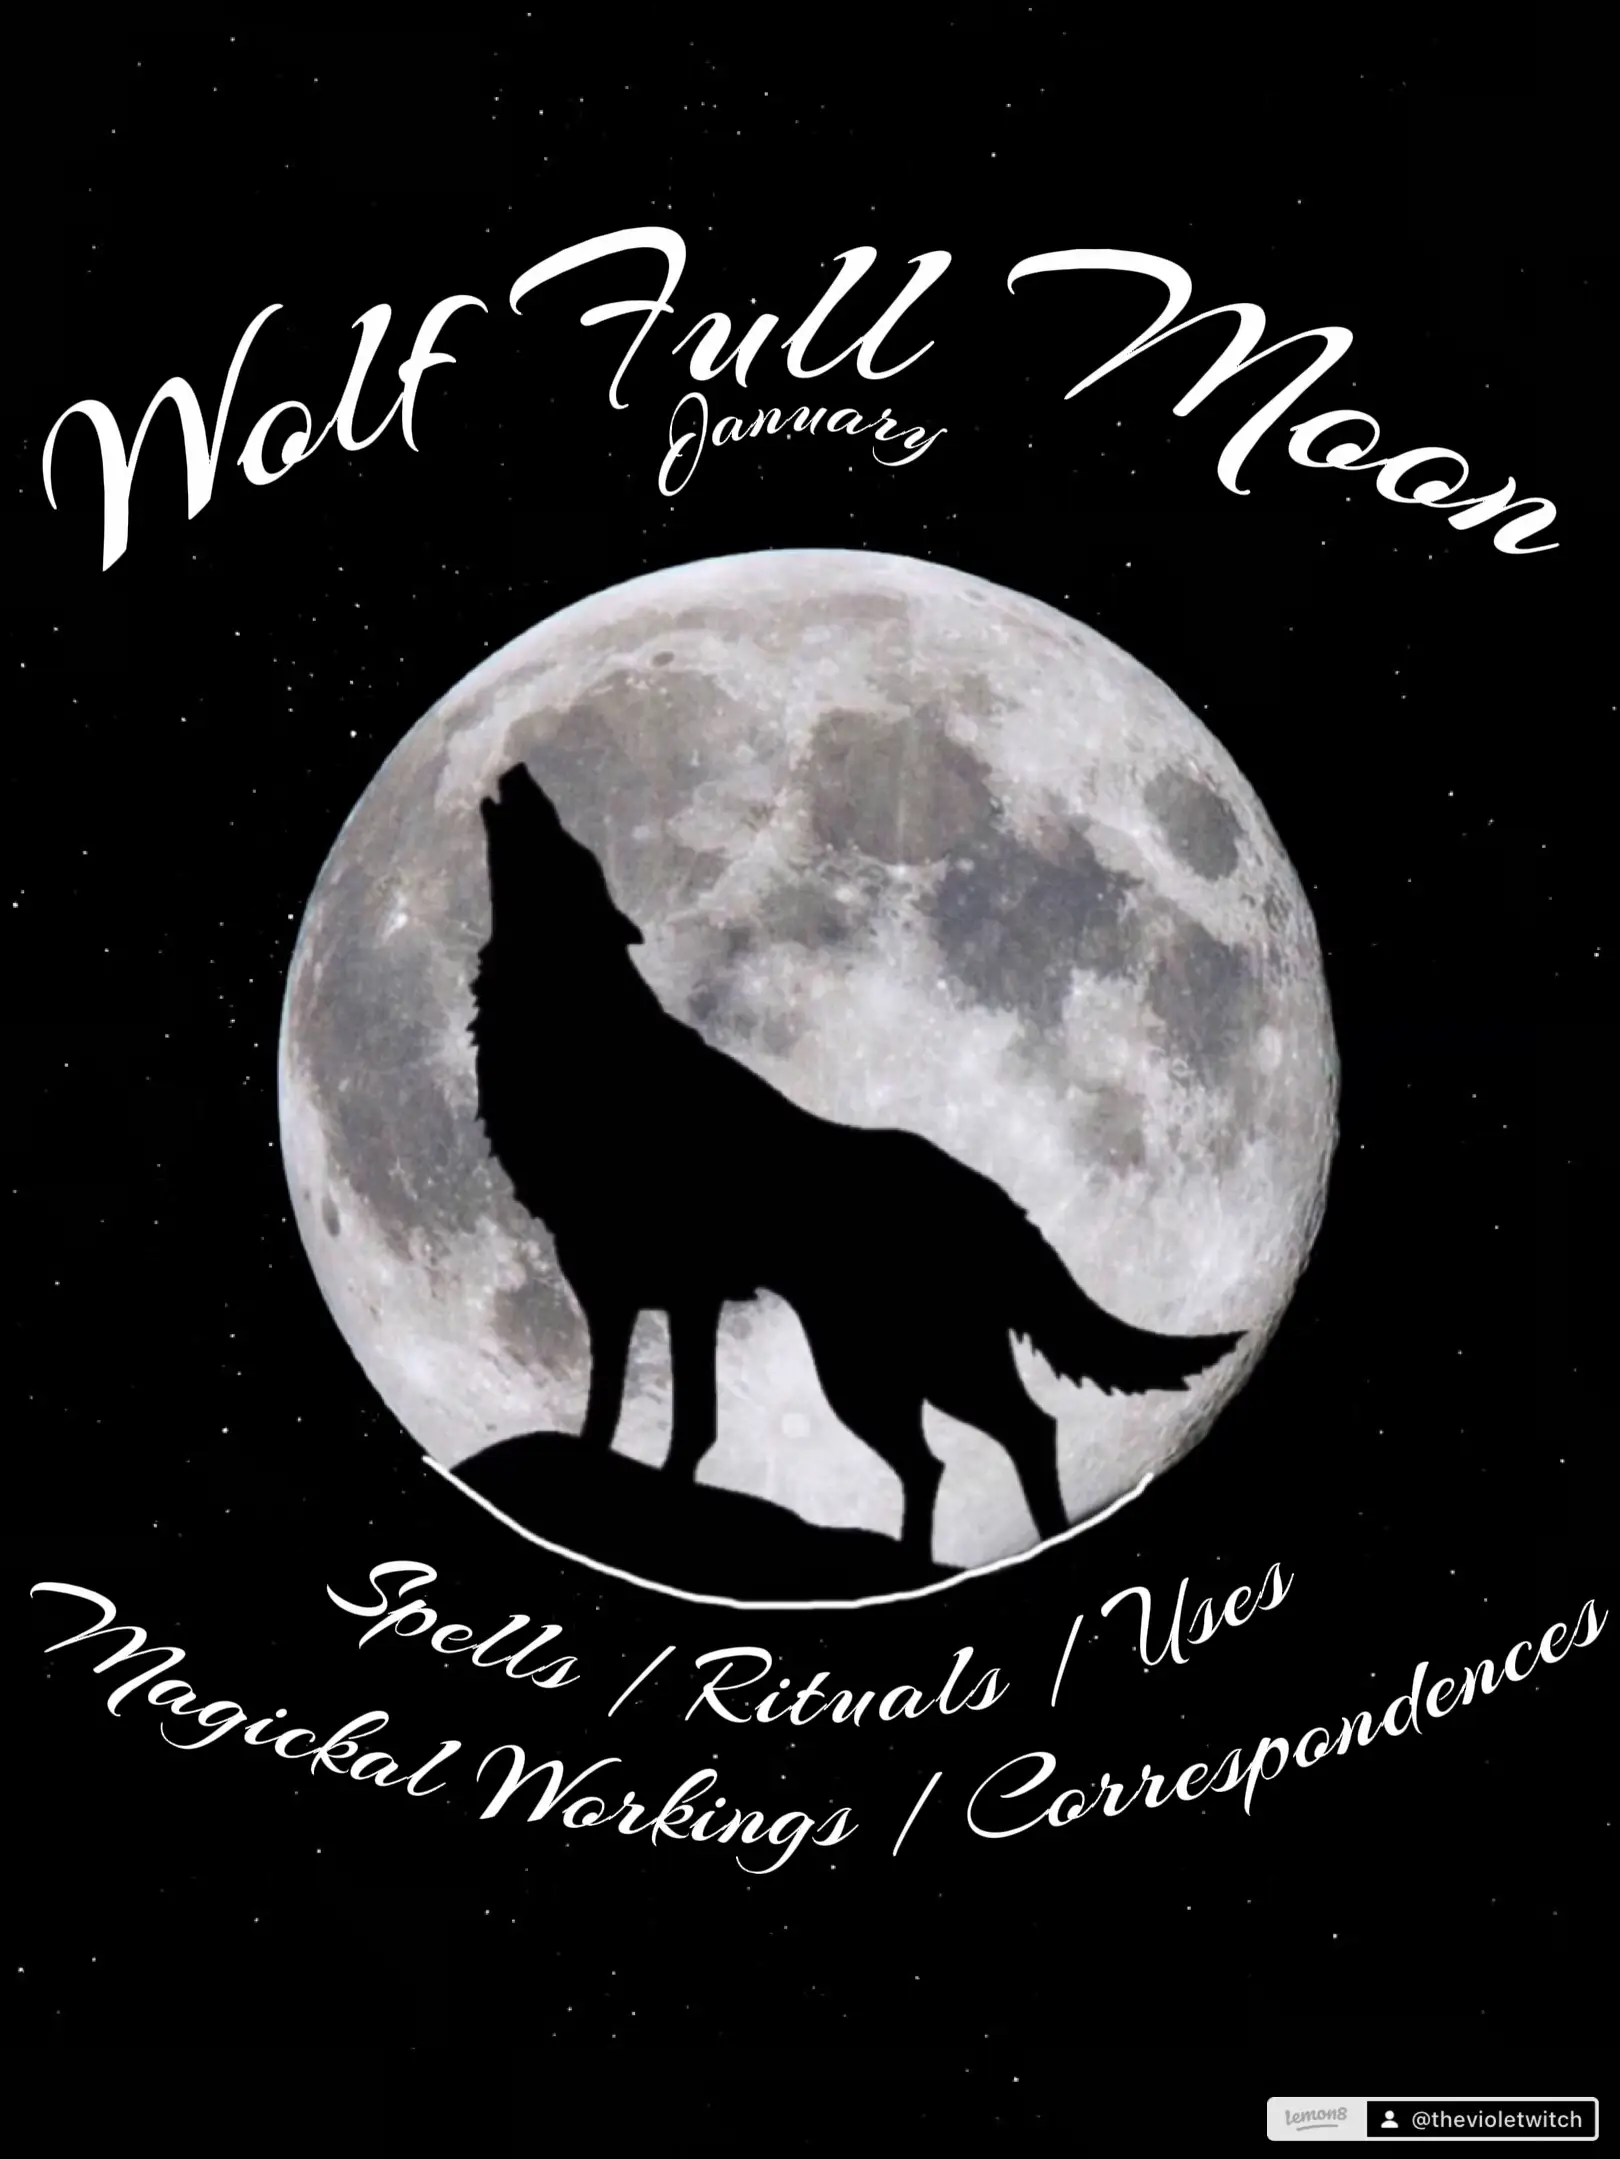 Magical Workings for The Full Moon